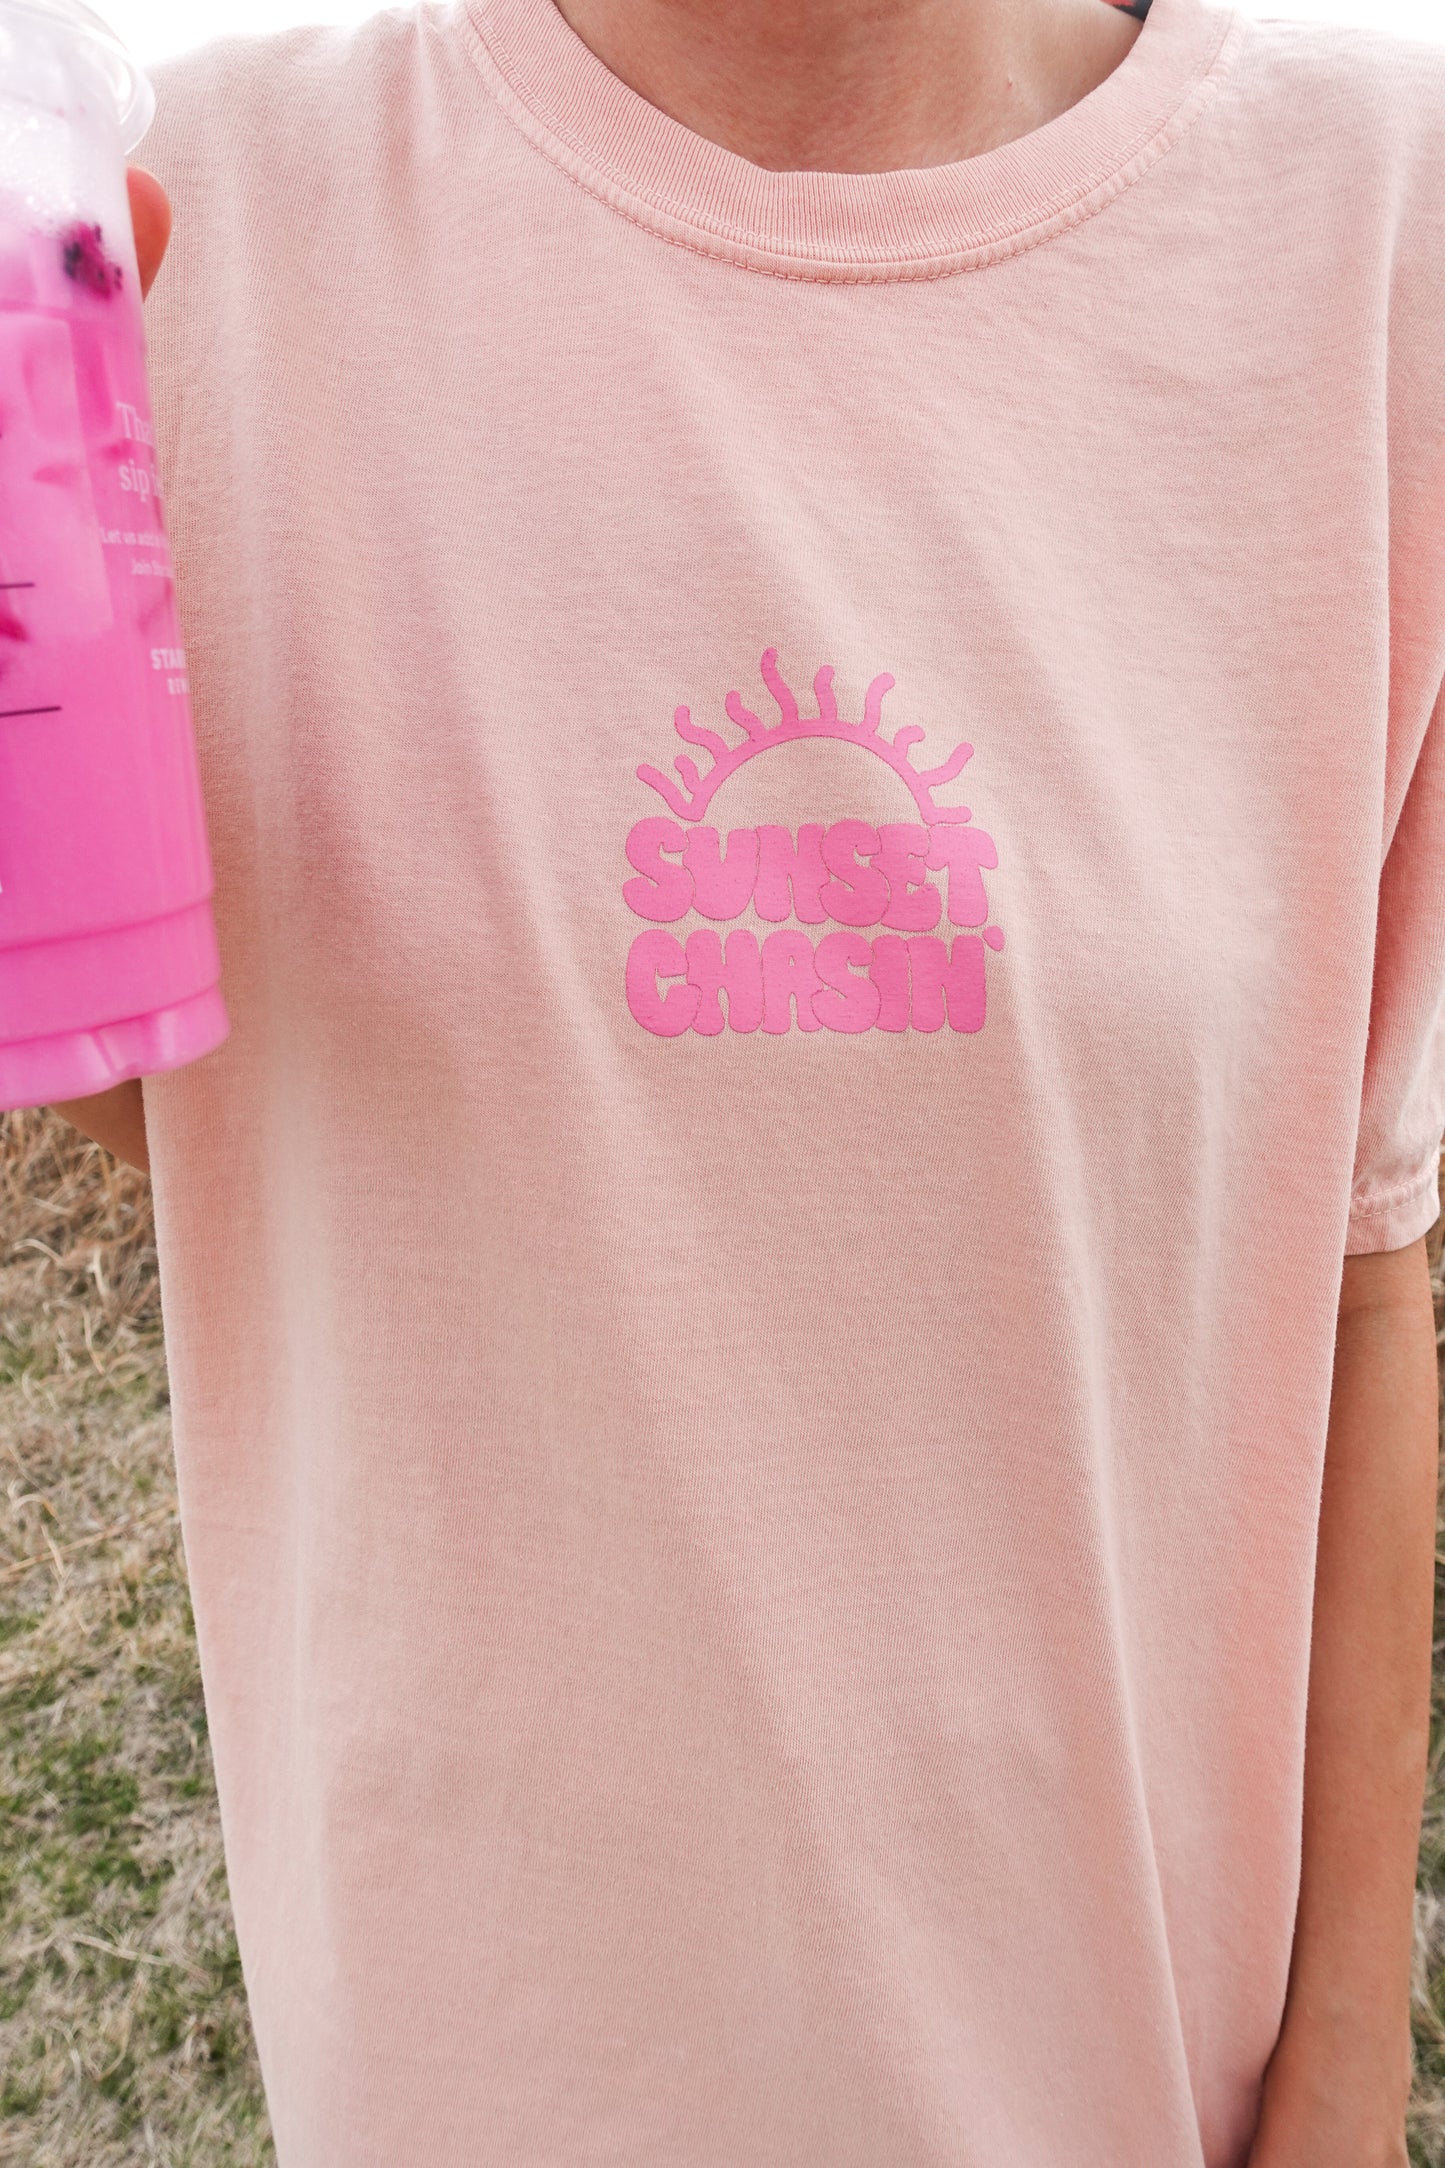 Let's Go Chase Sunsets Tee